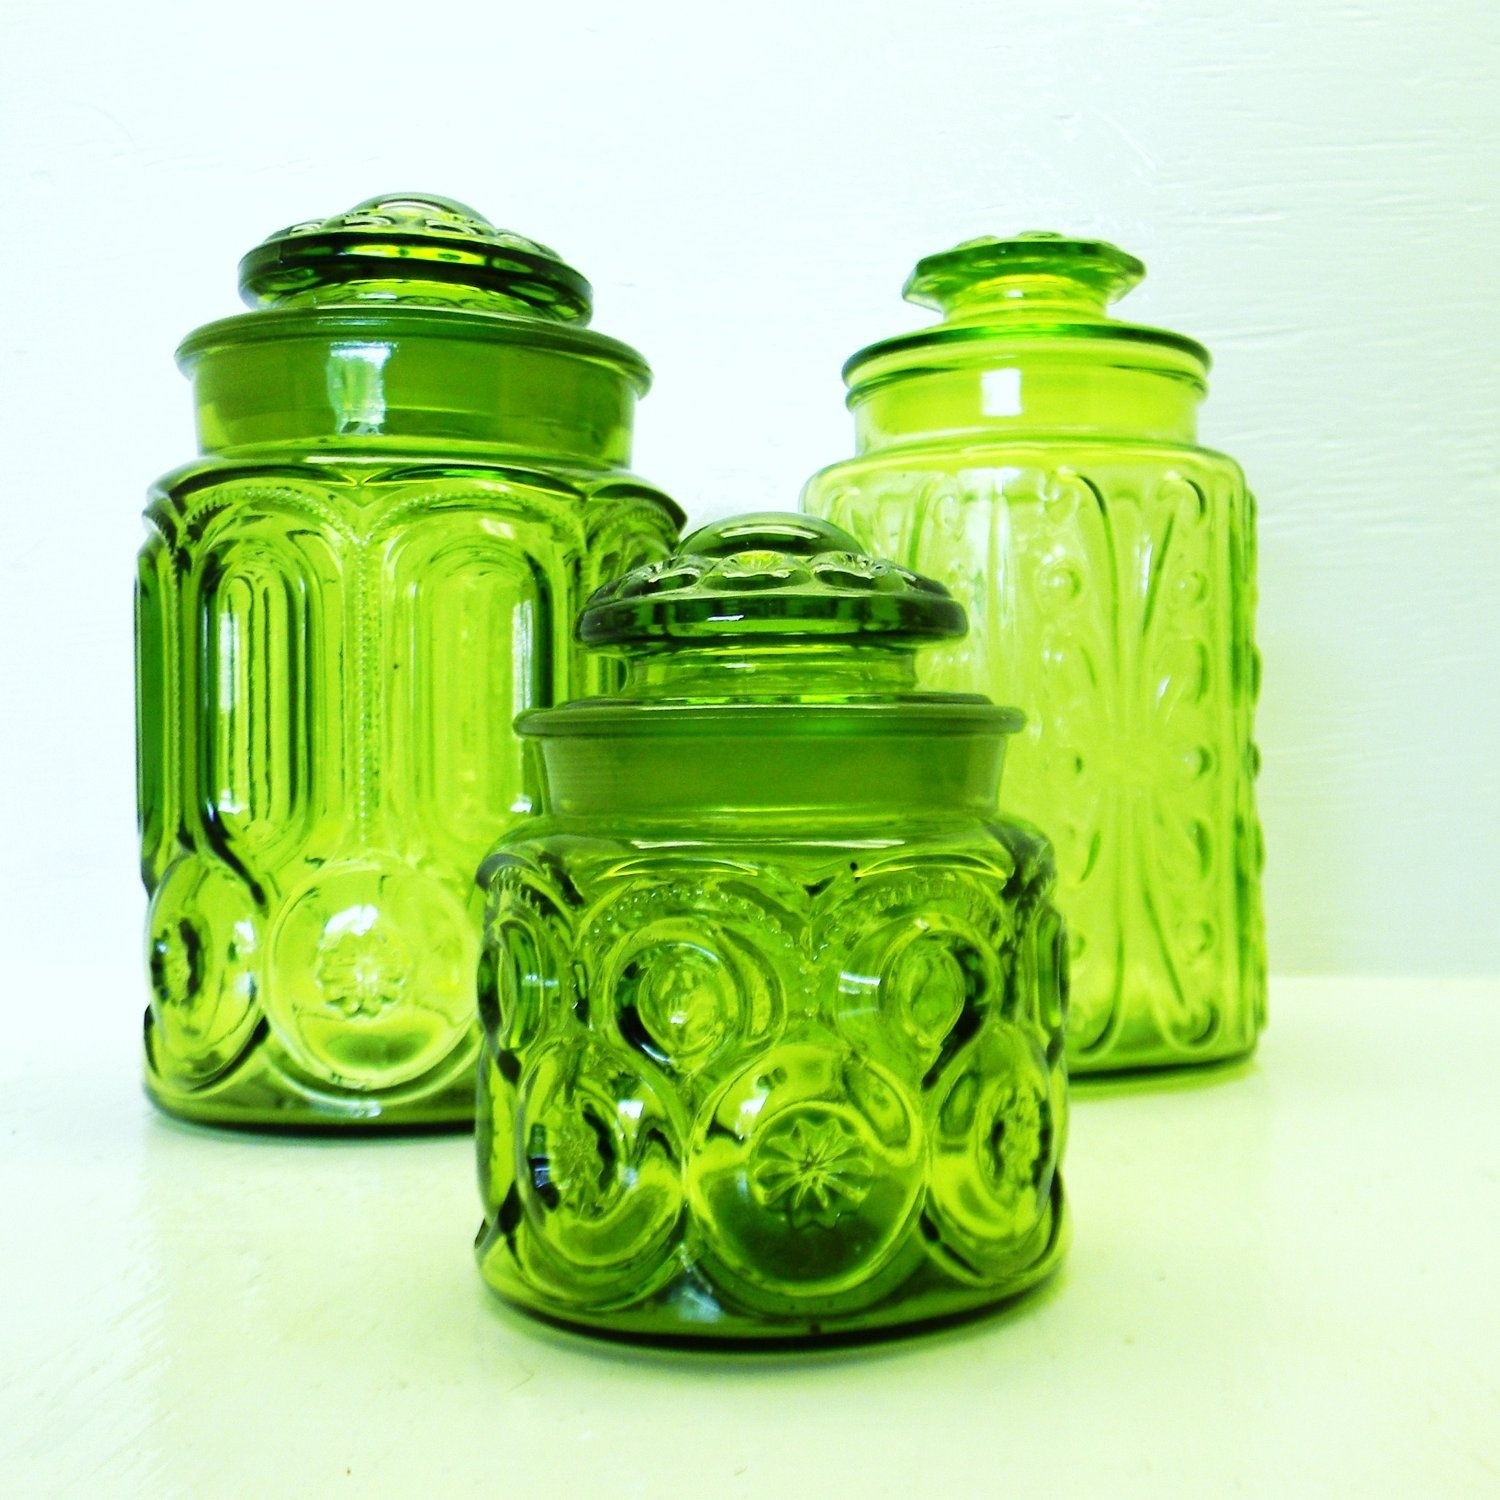 vintage canister-vintage glass canister-food storage-kitchen storage-canister with lid-house ware-retro-